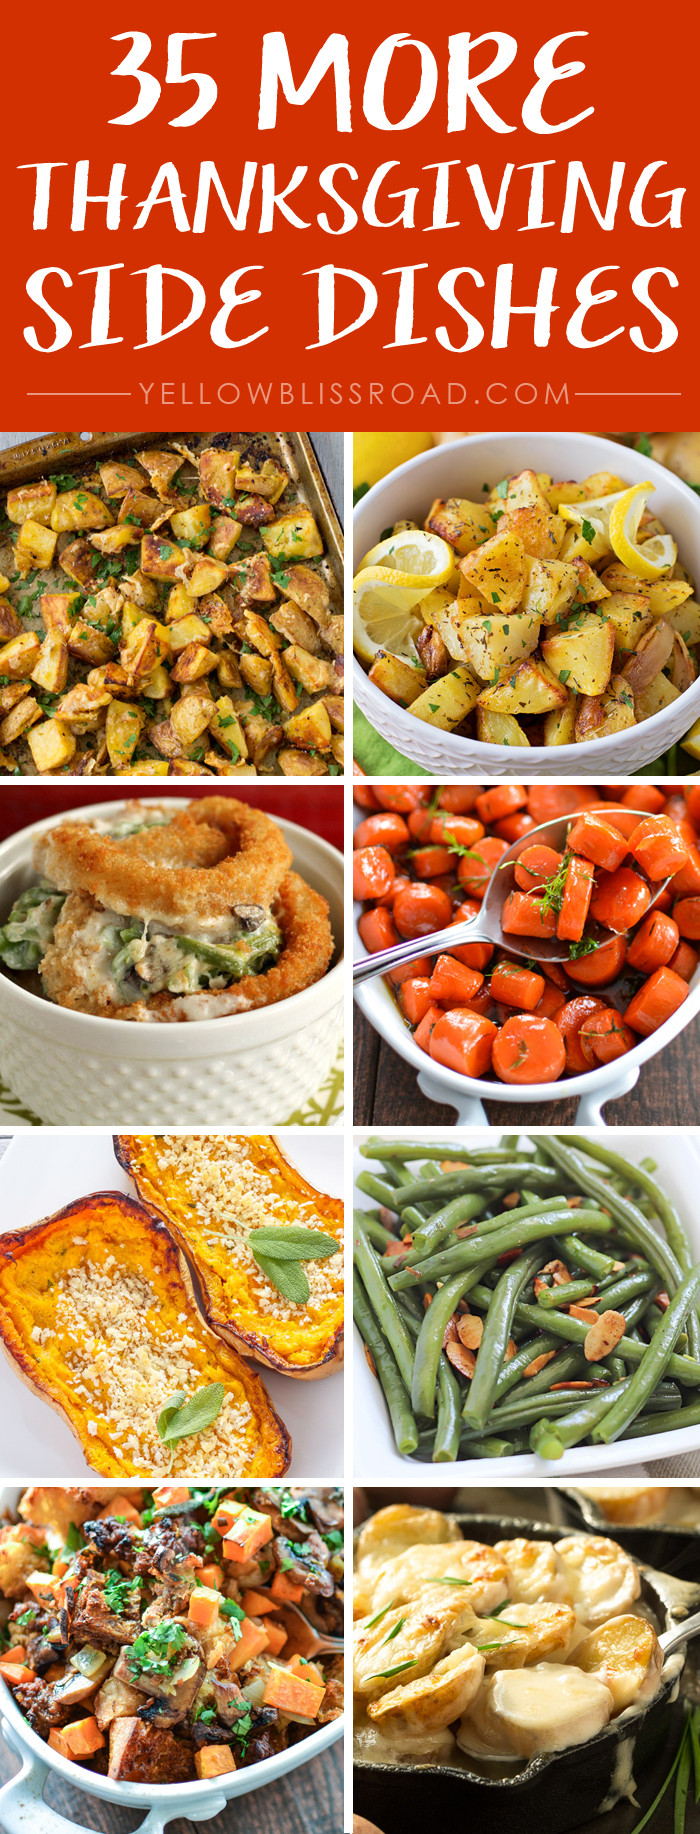 Side Dishes For Thanksgiving Dinner
 Twice Baked Potato Casserole with Potato Chip Crust